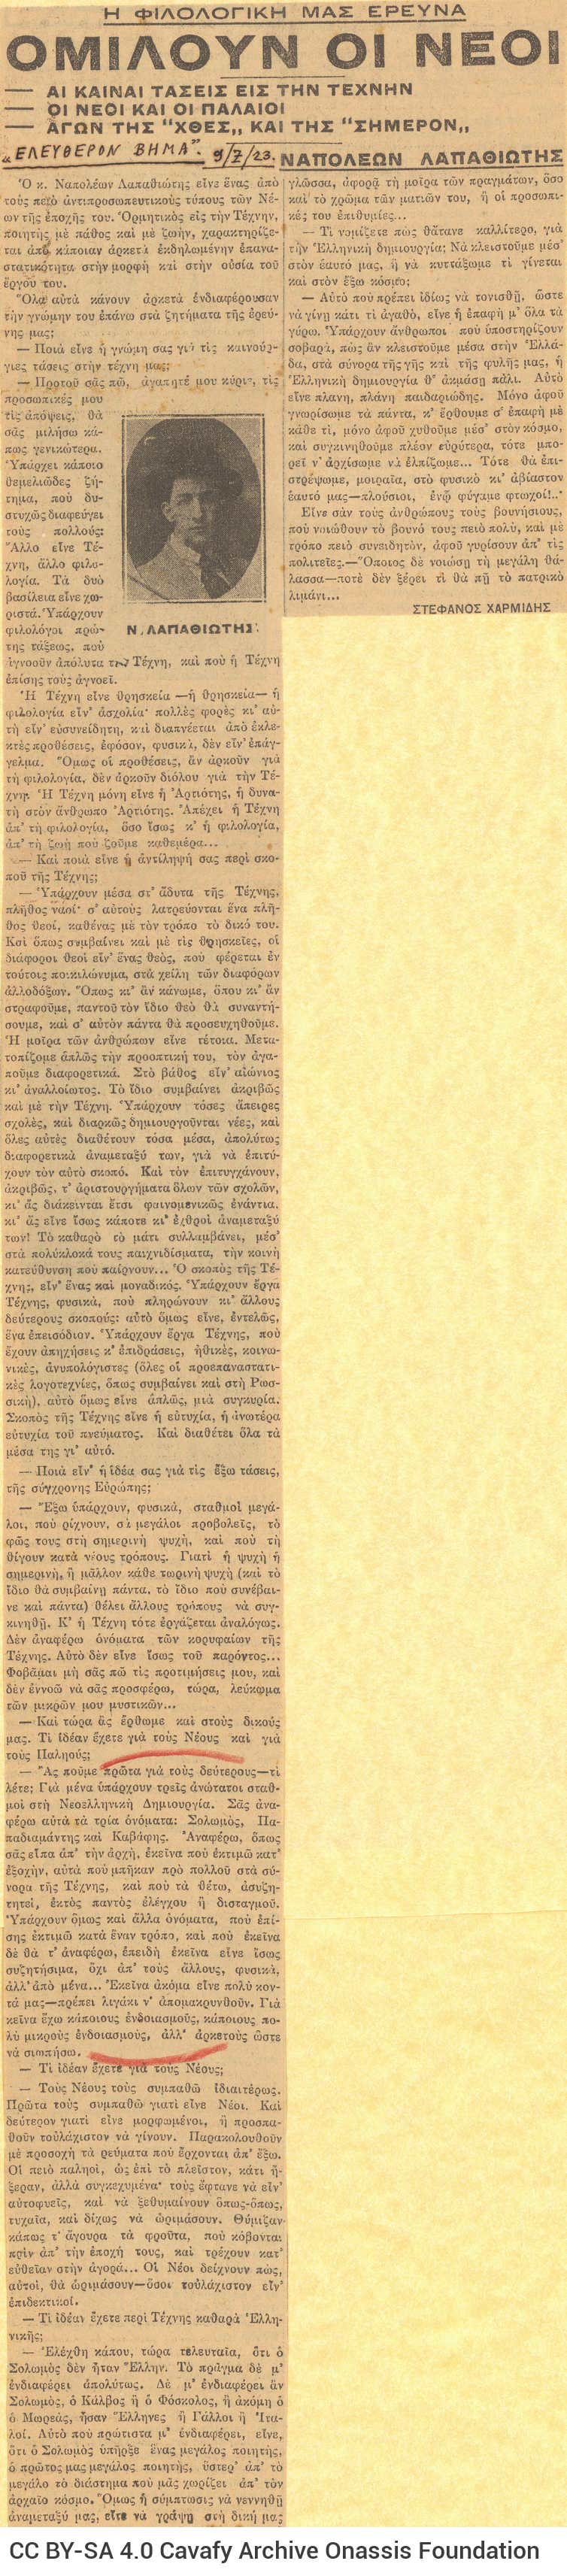 Clipping from the Athenian newspaper *Eleftheron Vima*. It contains an interview of Napoleon Lapathiotis to Stefanos Charmide